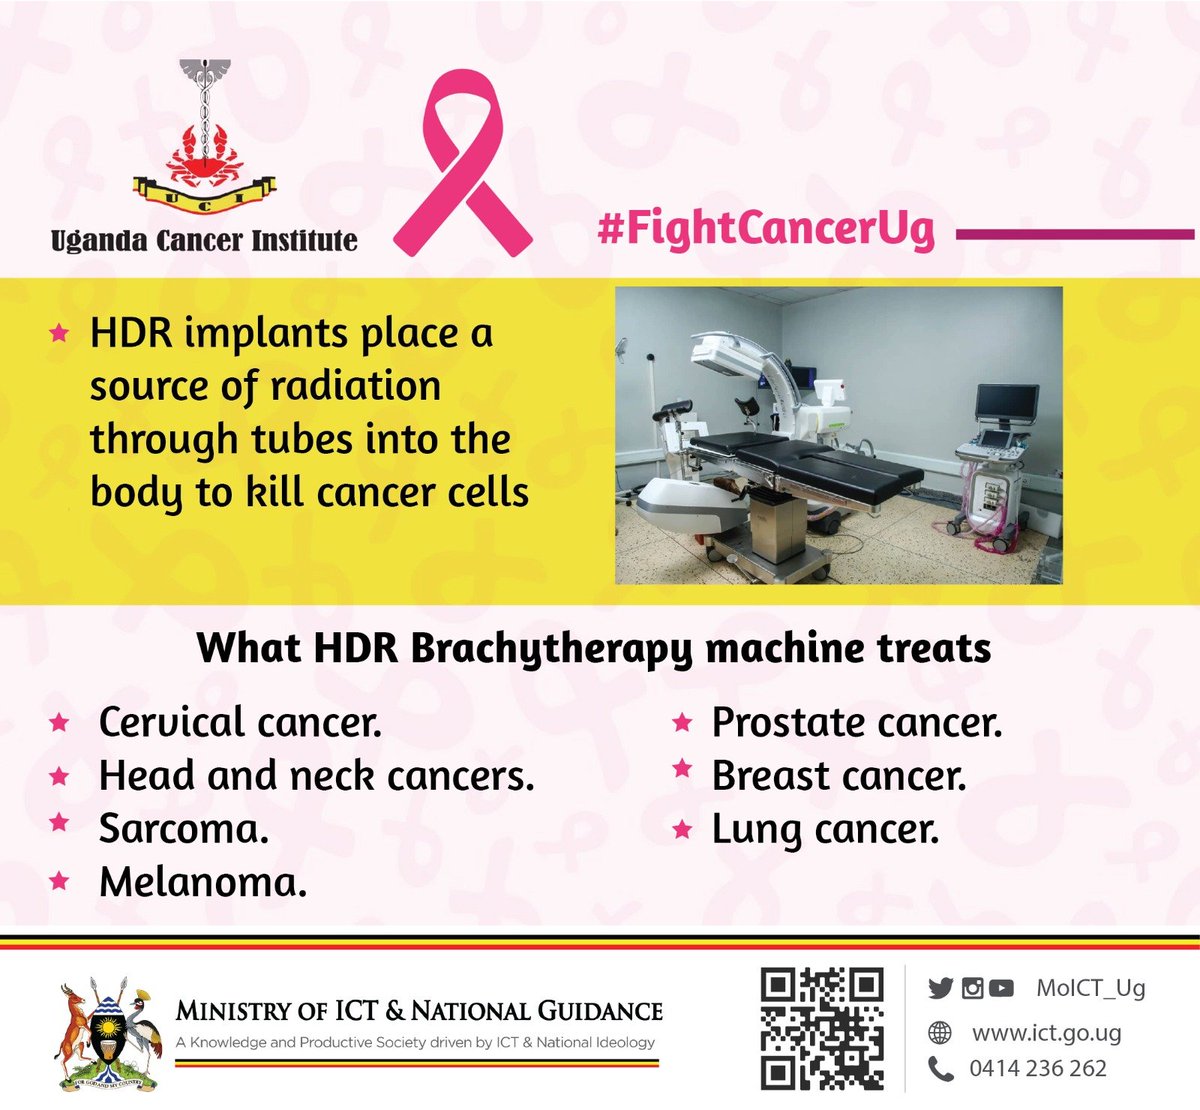 High Dose Rate (HDR) Brachytherapy with Interstitial Implants for Treatment of Gynecologic Cancer treatments begin about a week after the external beam radiation therapy is completed. You’ll be admitted to the hospital for 2 days for your HDR treatment.
#FightCancerUg